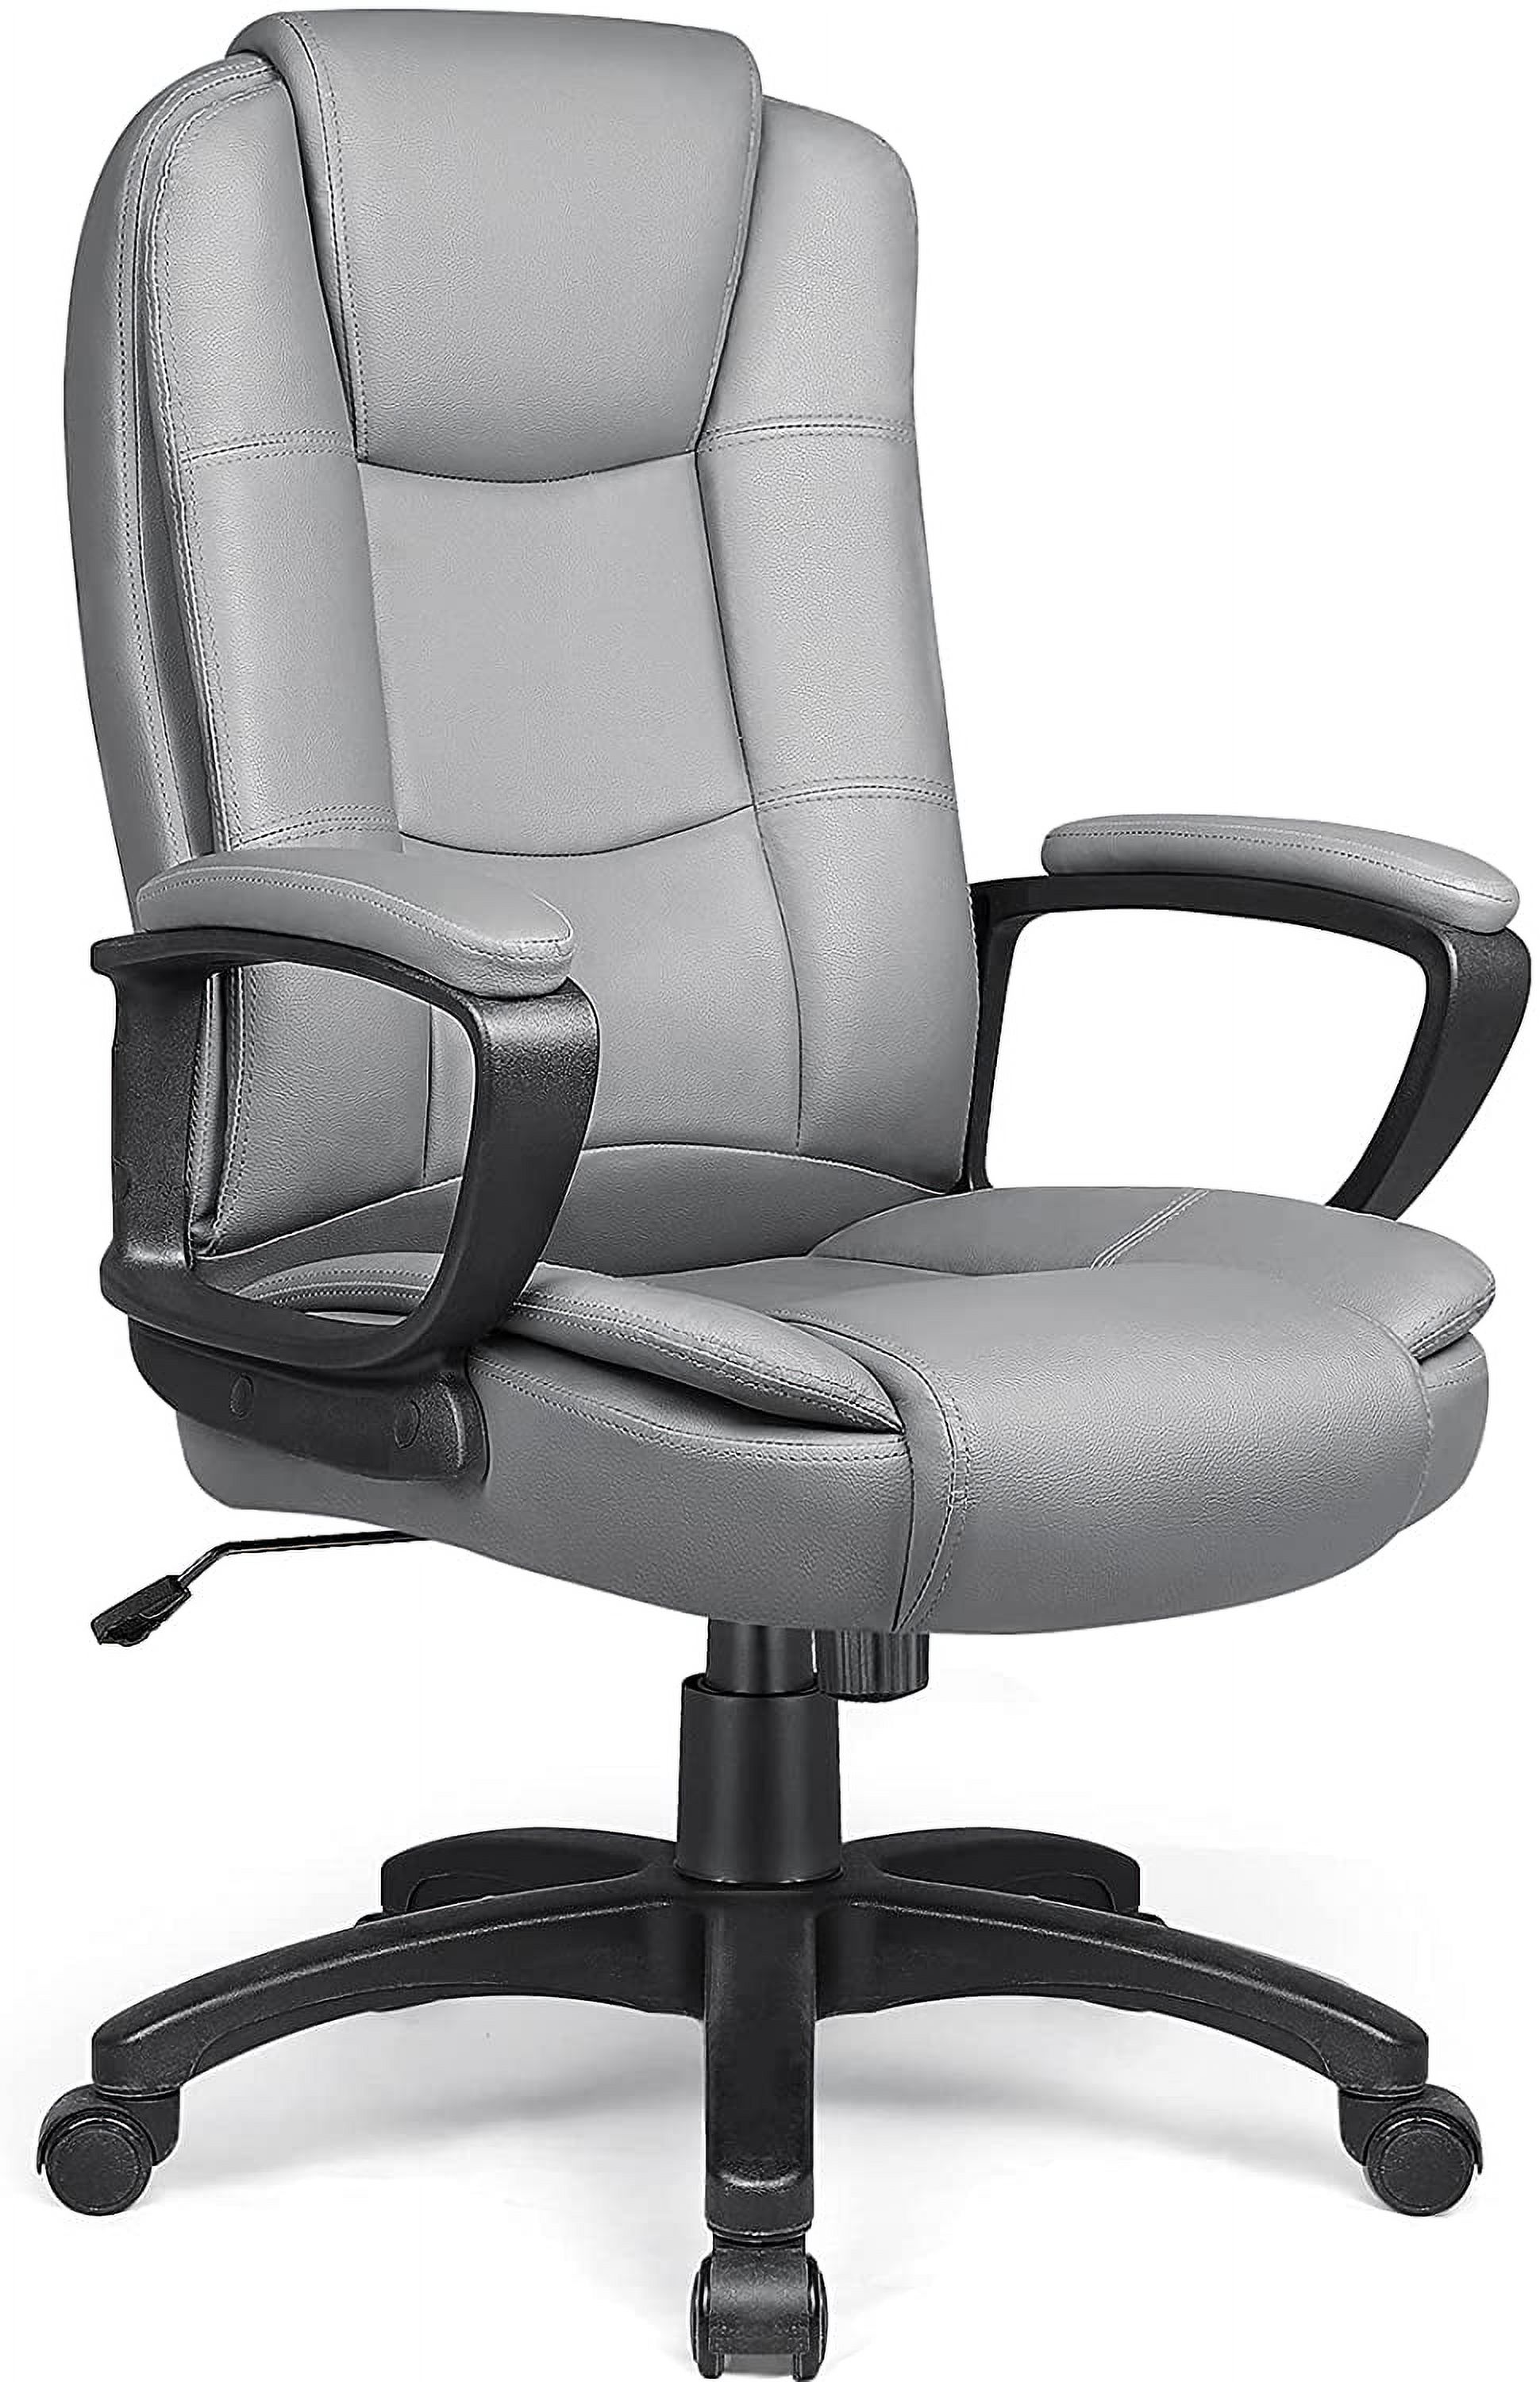 Waleaf Home Office Chair, 8Hours Heavy Duty Design, Ergonomic High Back Cushion Lumbar Back Support, Computer Desk Chair, Big and Tall Chair, Adjustable Executive Leather Chair With Arms - image 1 of 8